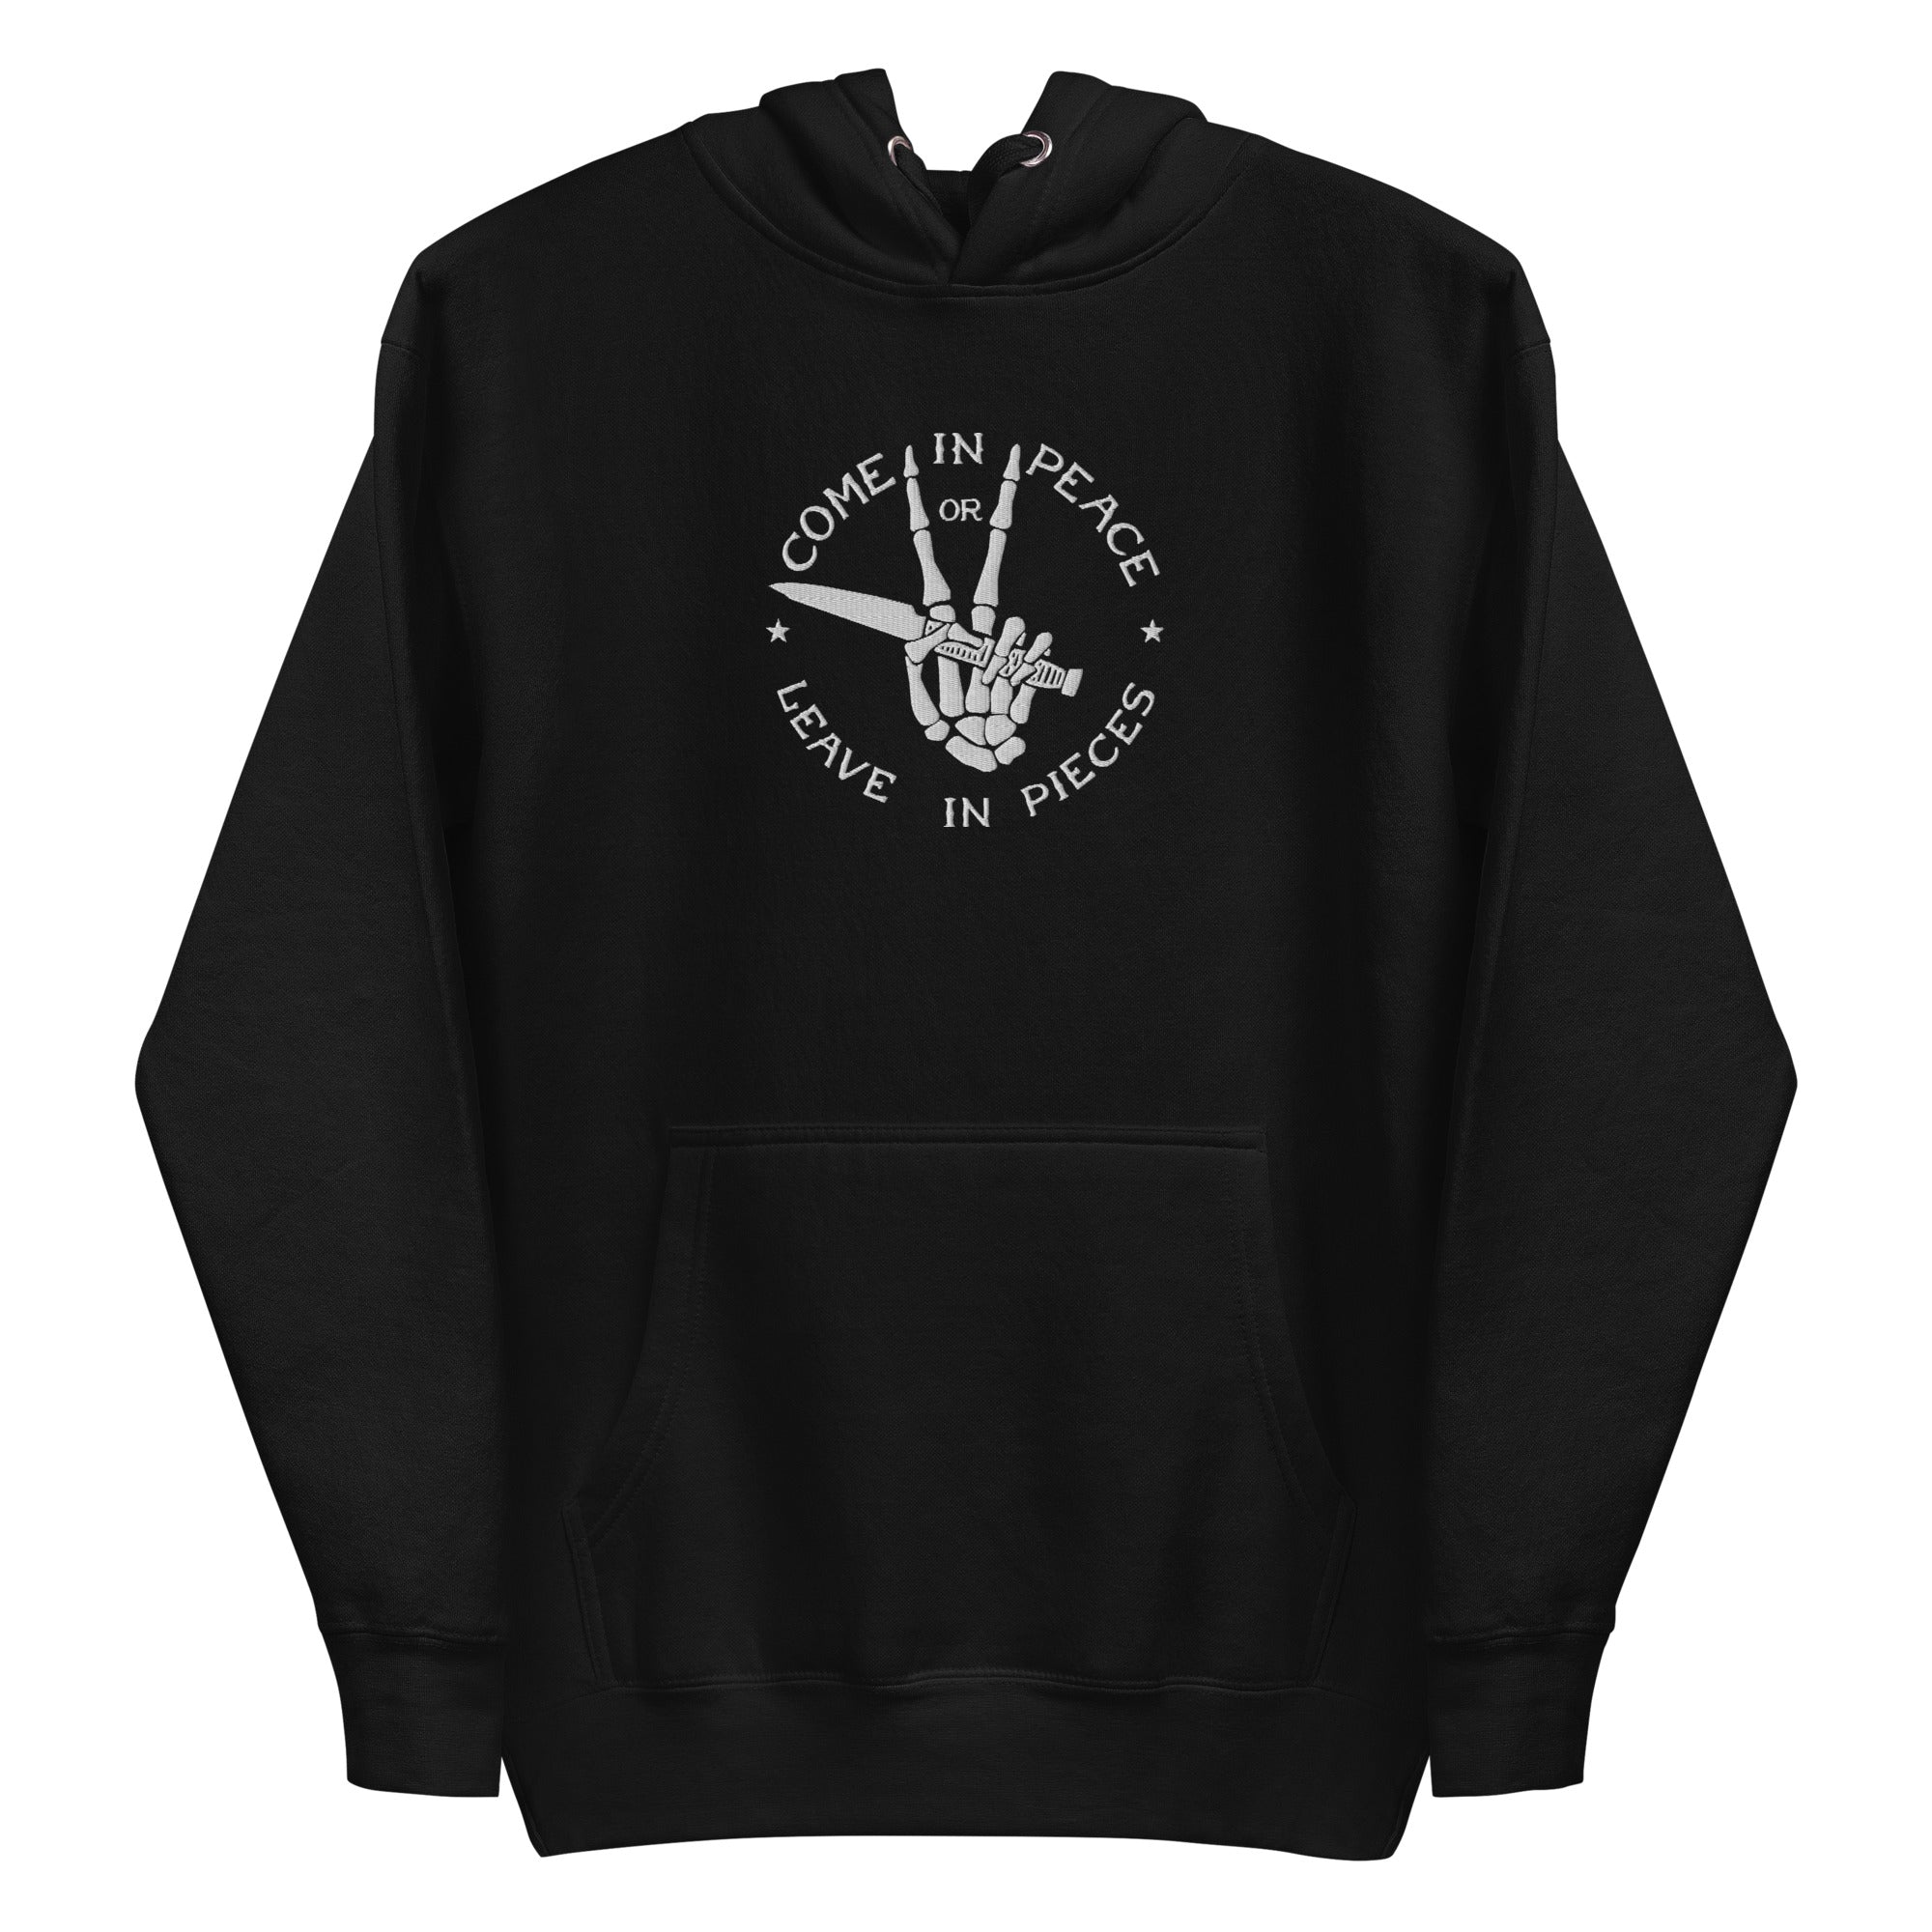 Come In Peace Or Leave In Pieces Embroidered Hoodie